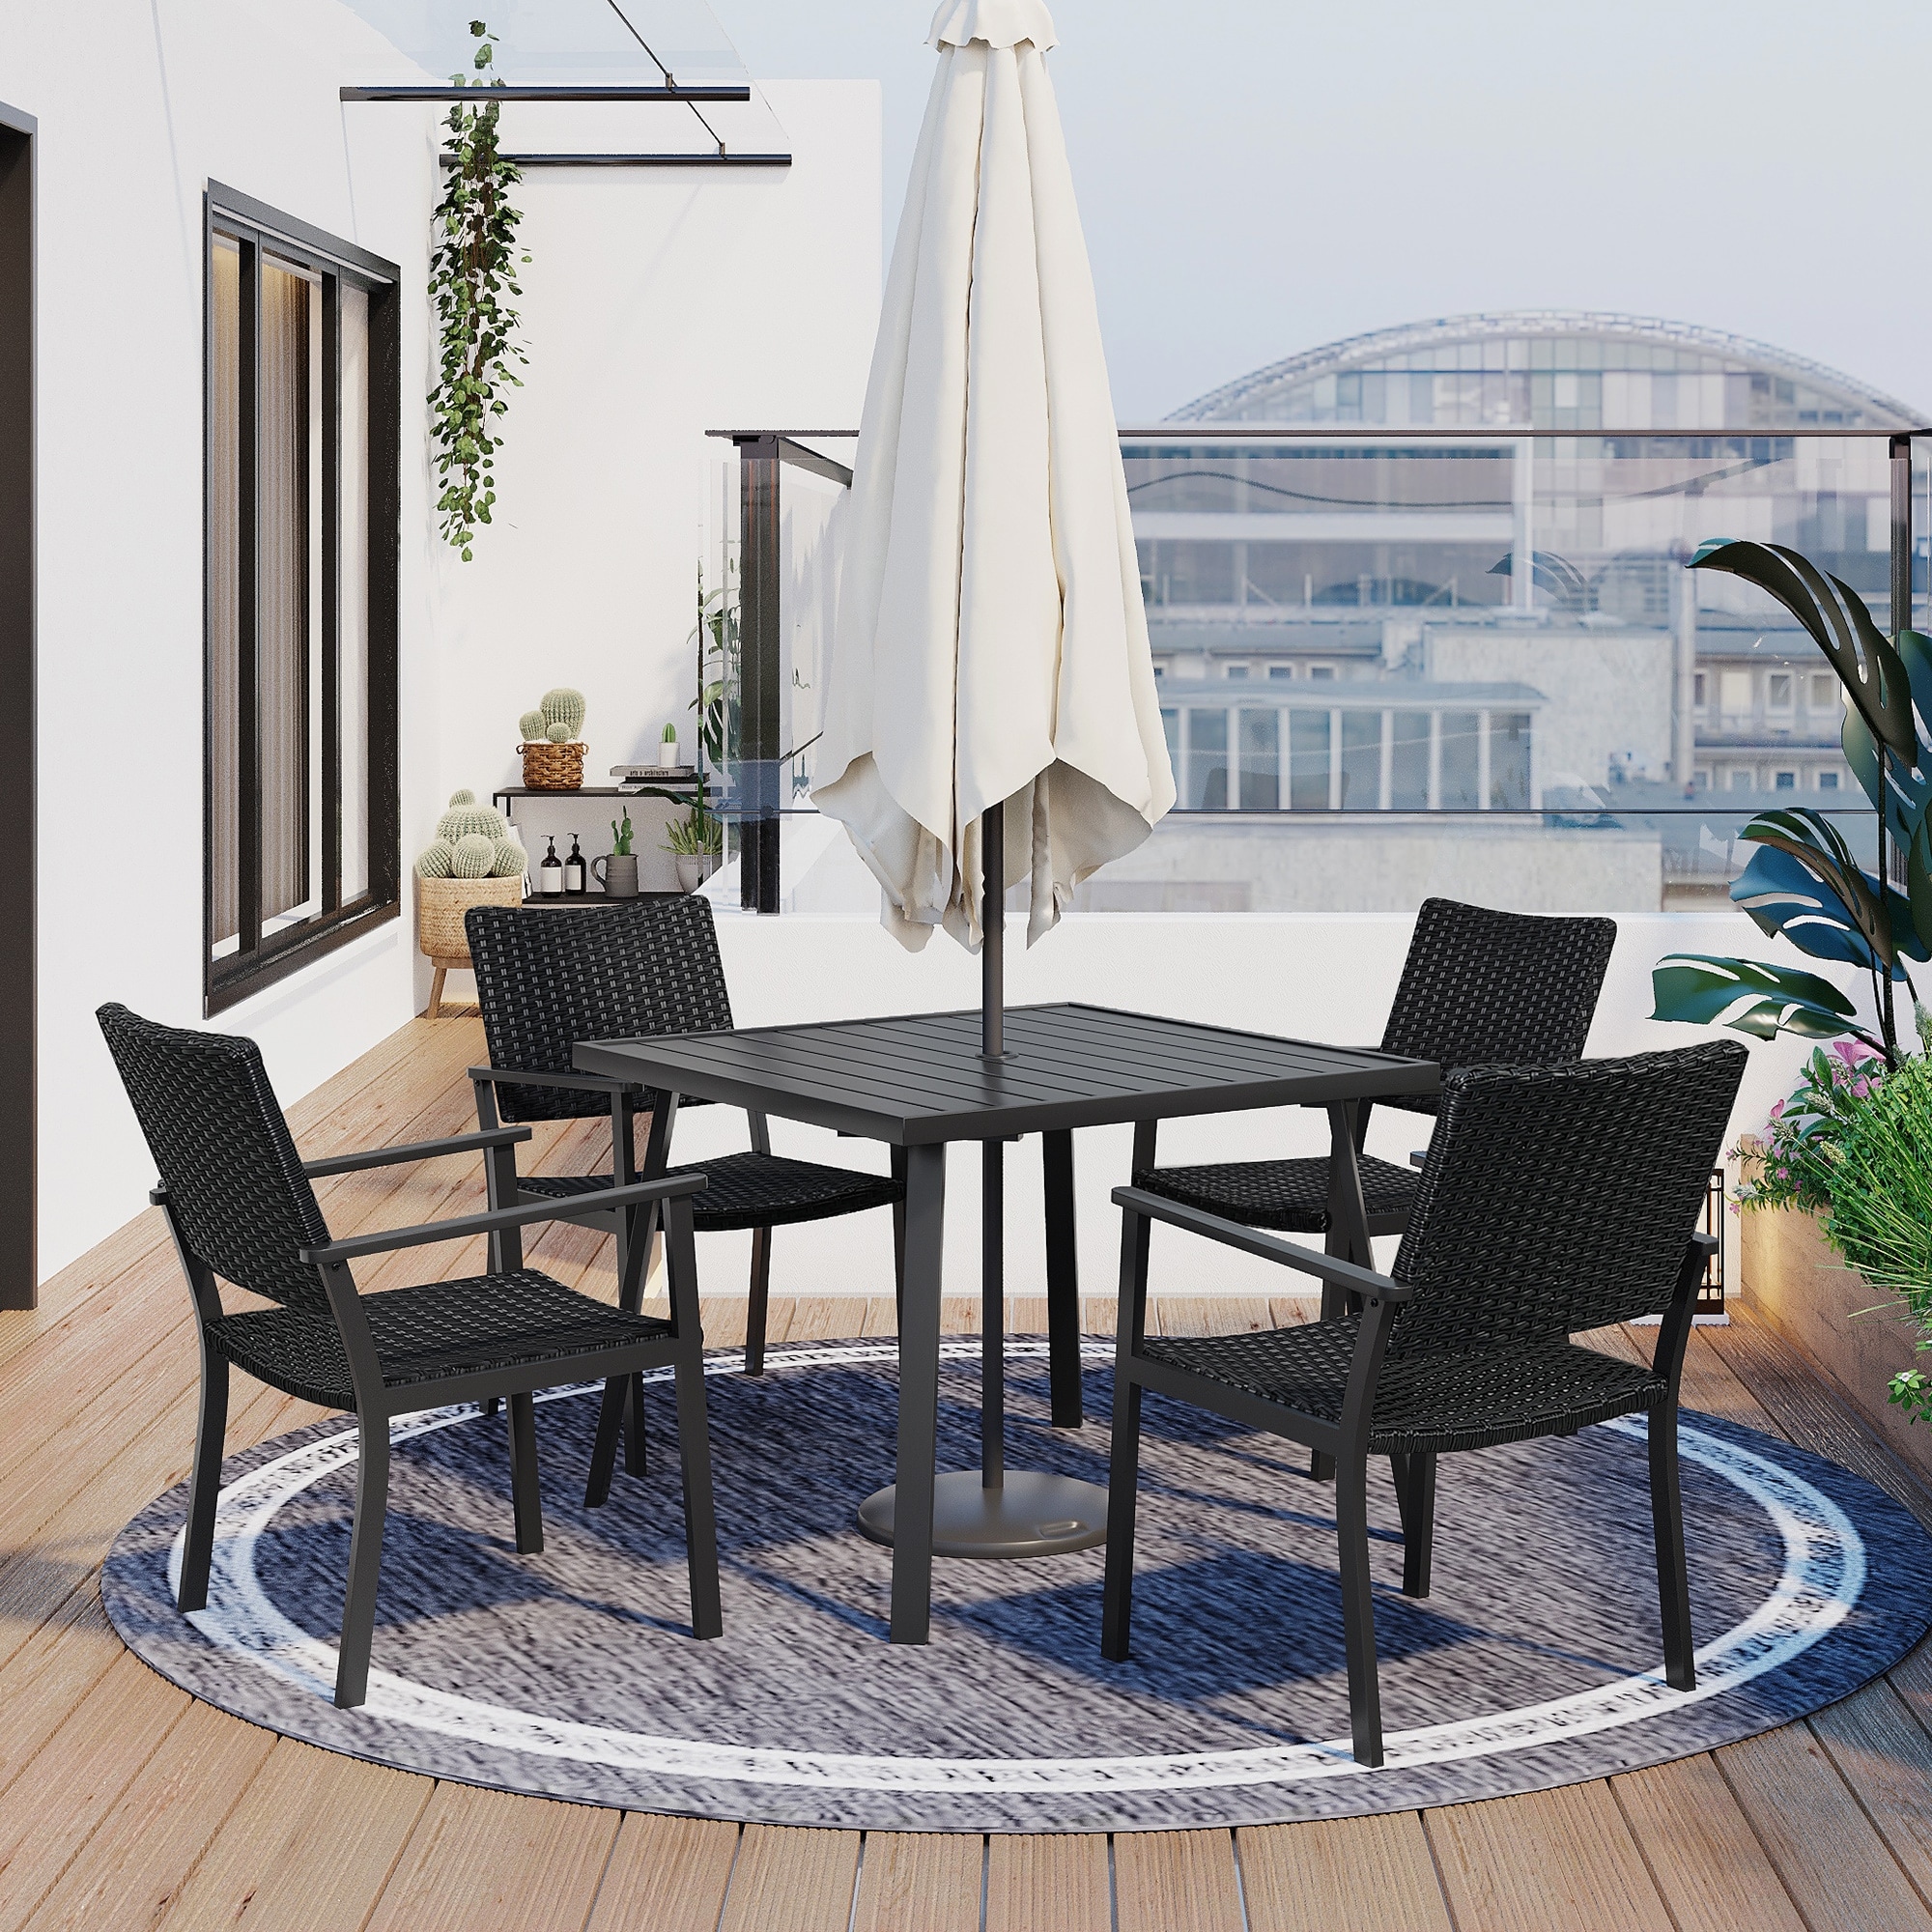 5 Pcs Outdoor Patio Wicker Dining Sets With Umbrella Hole  Black